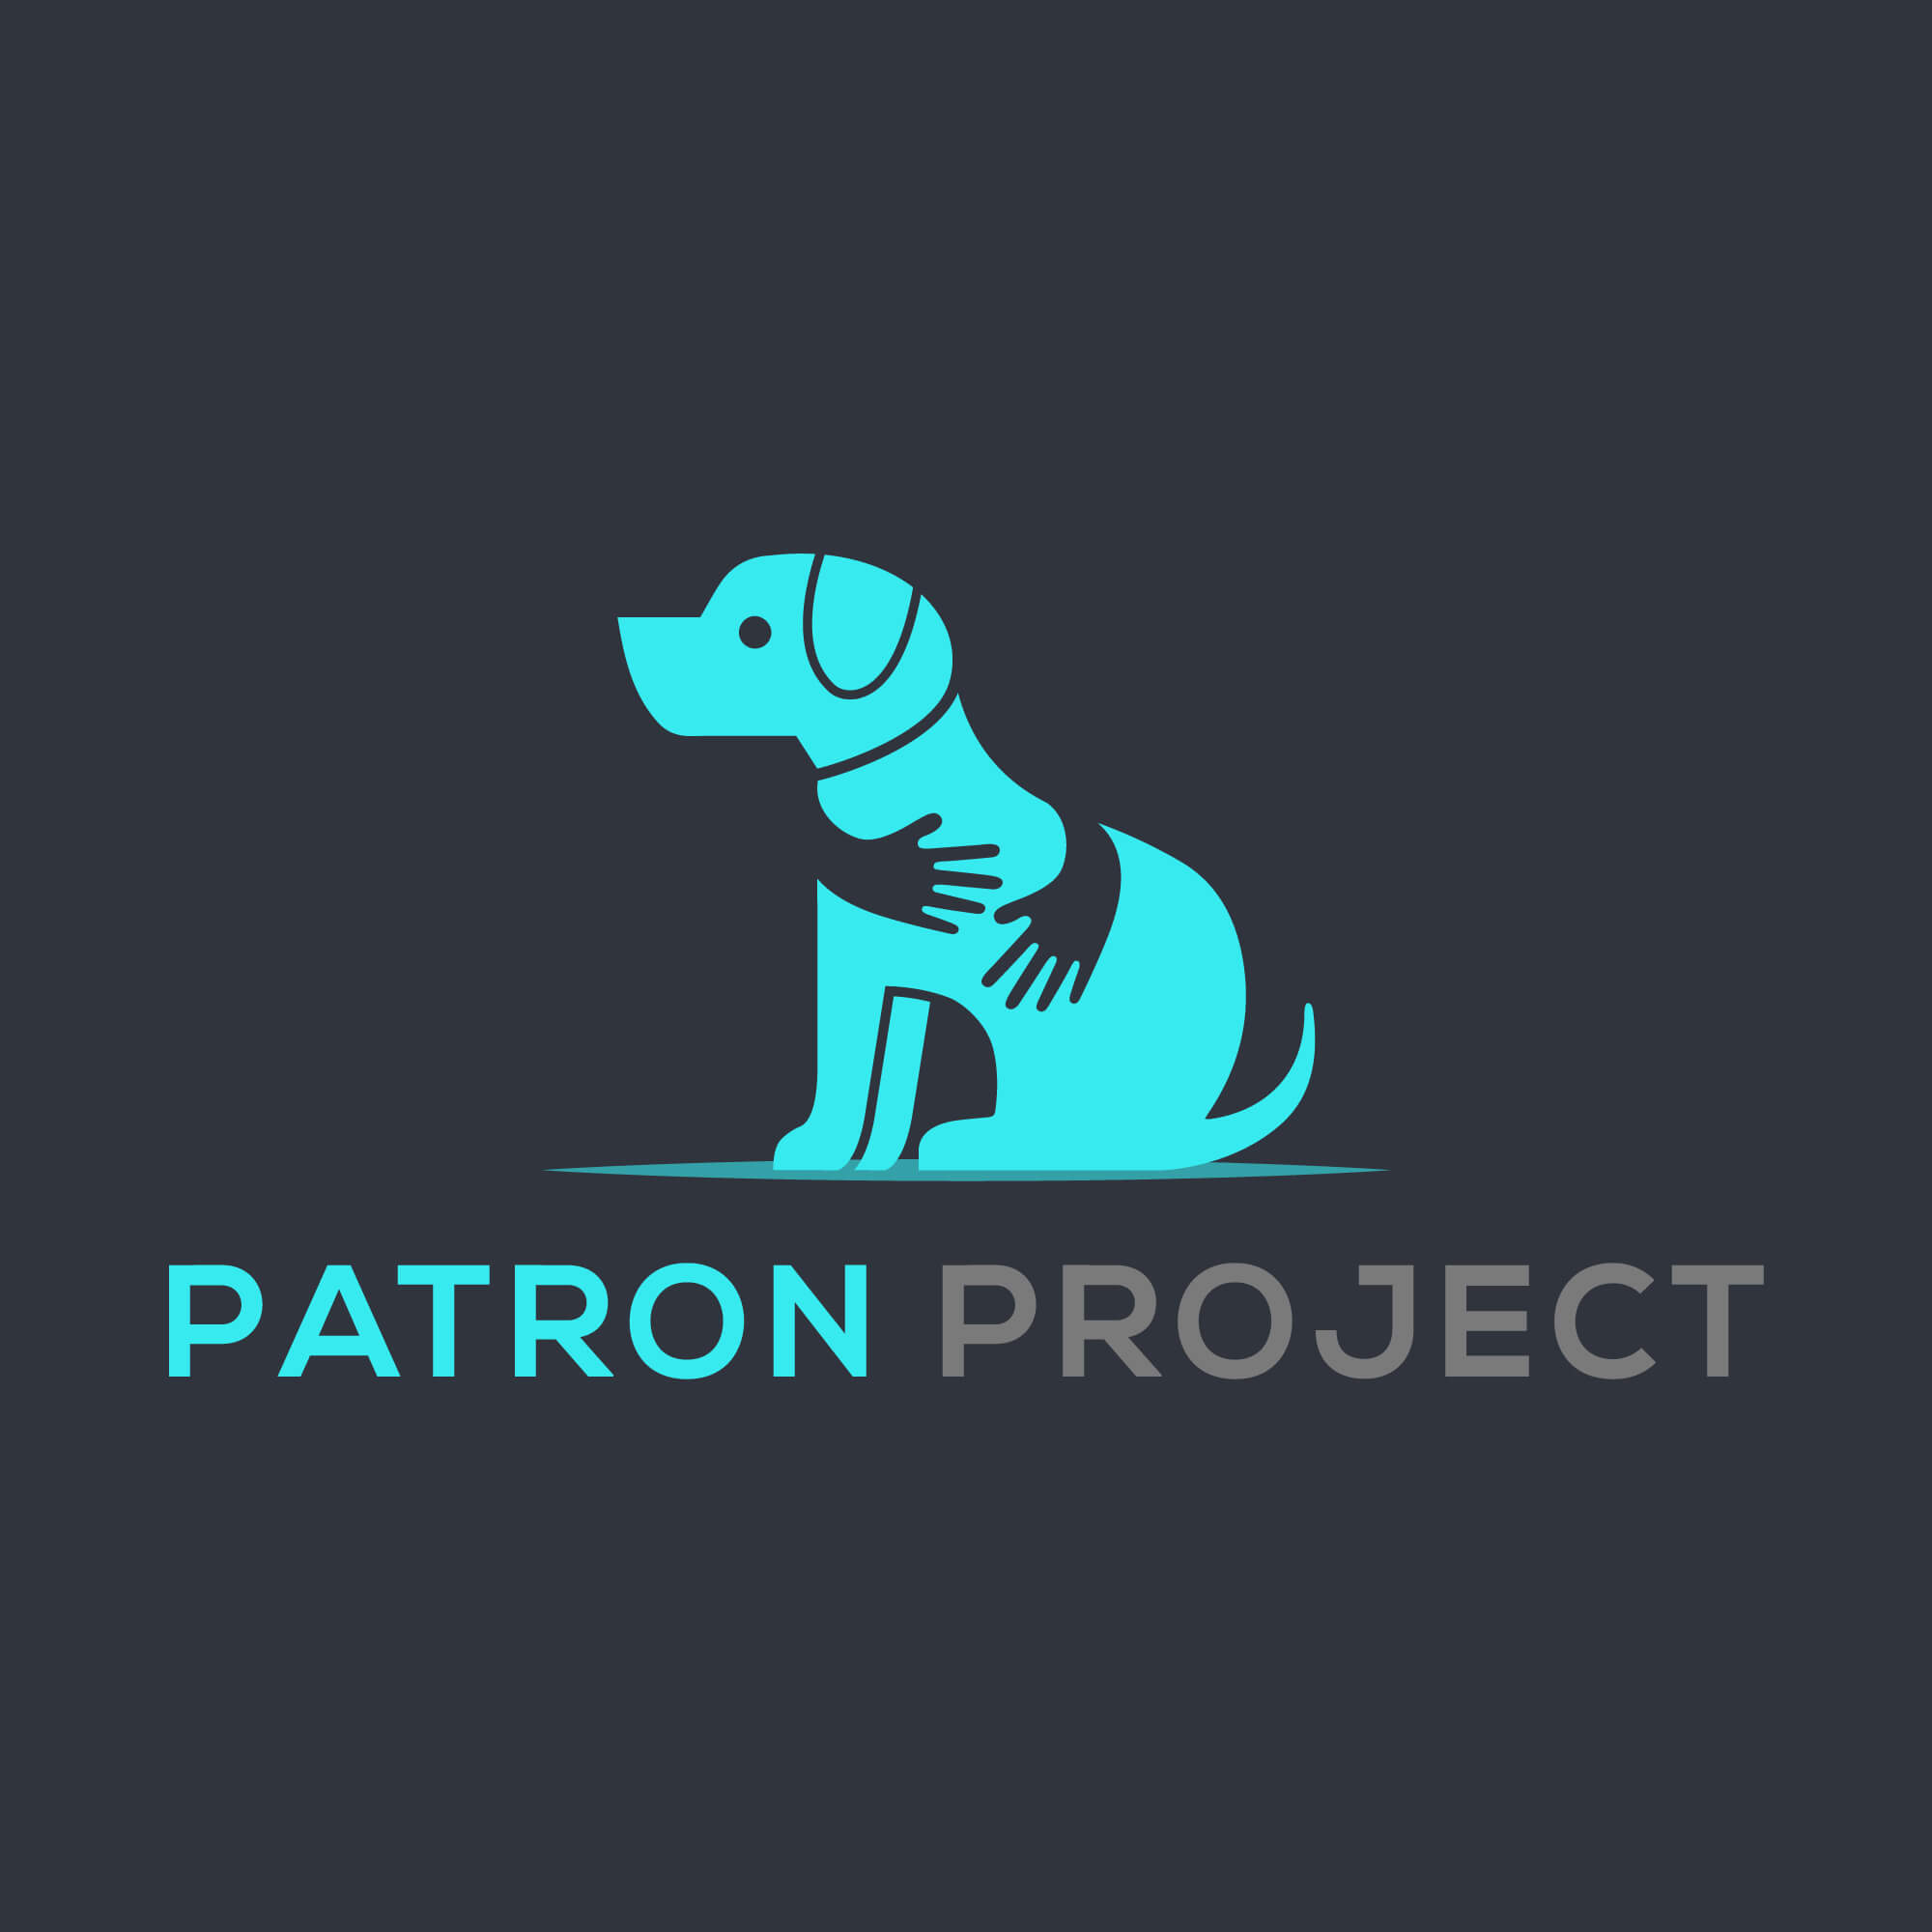 Patron Project has Arrived and it’s Going to Change Everything.